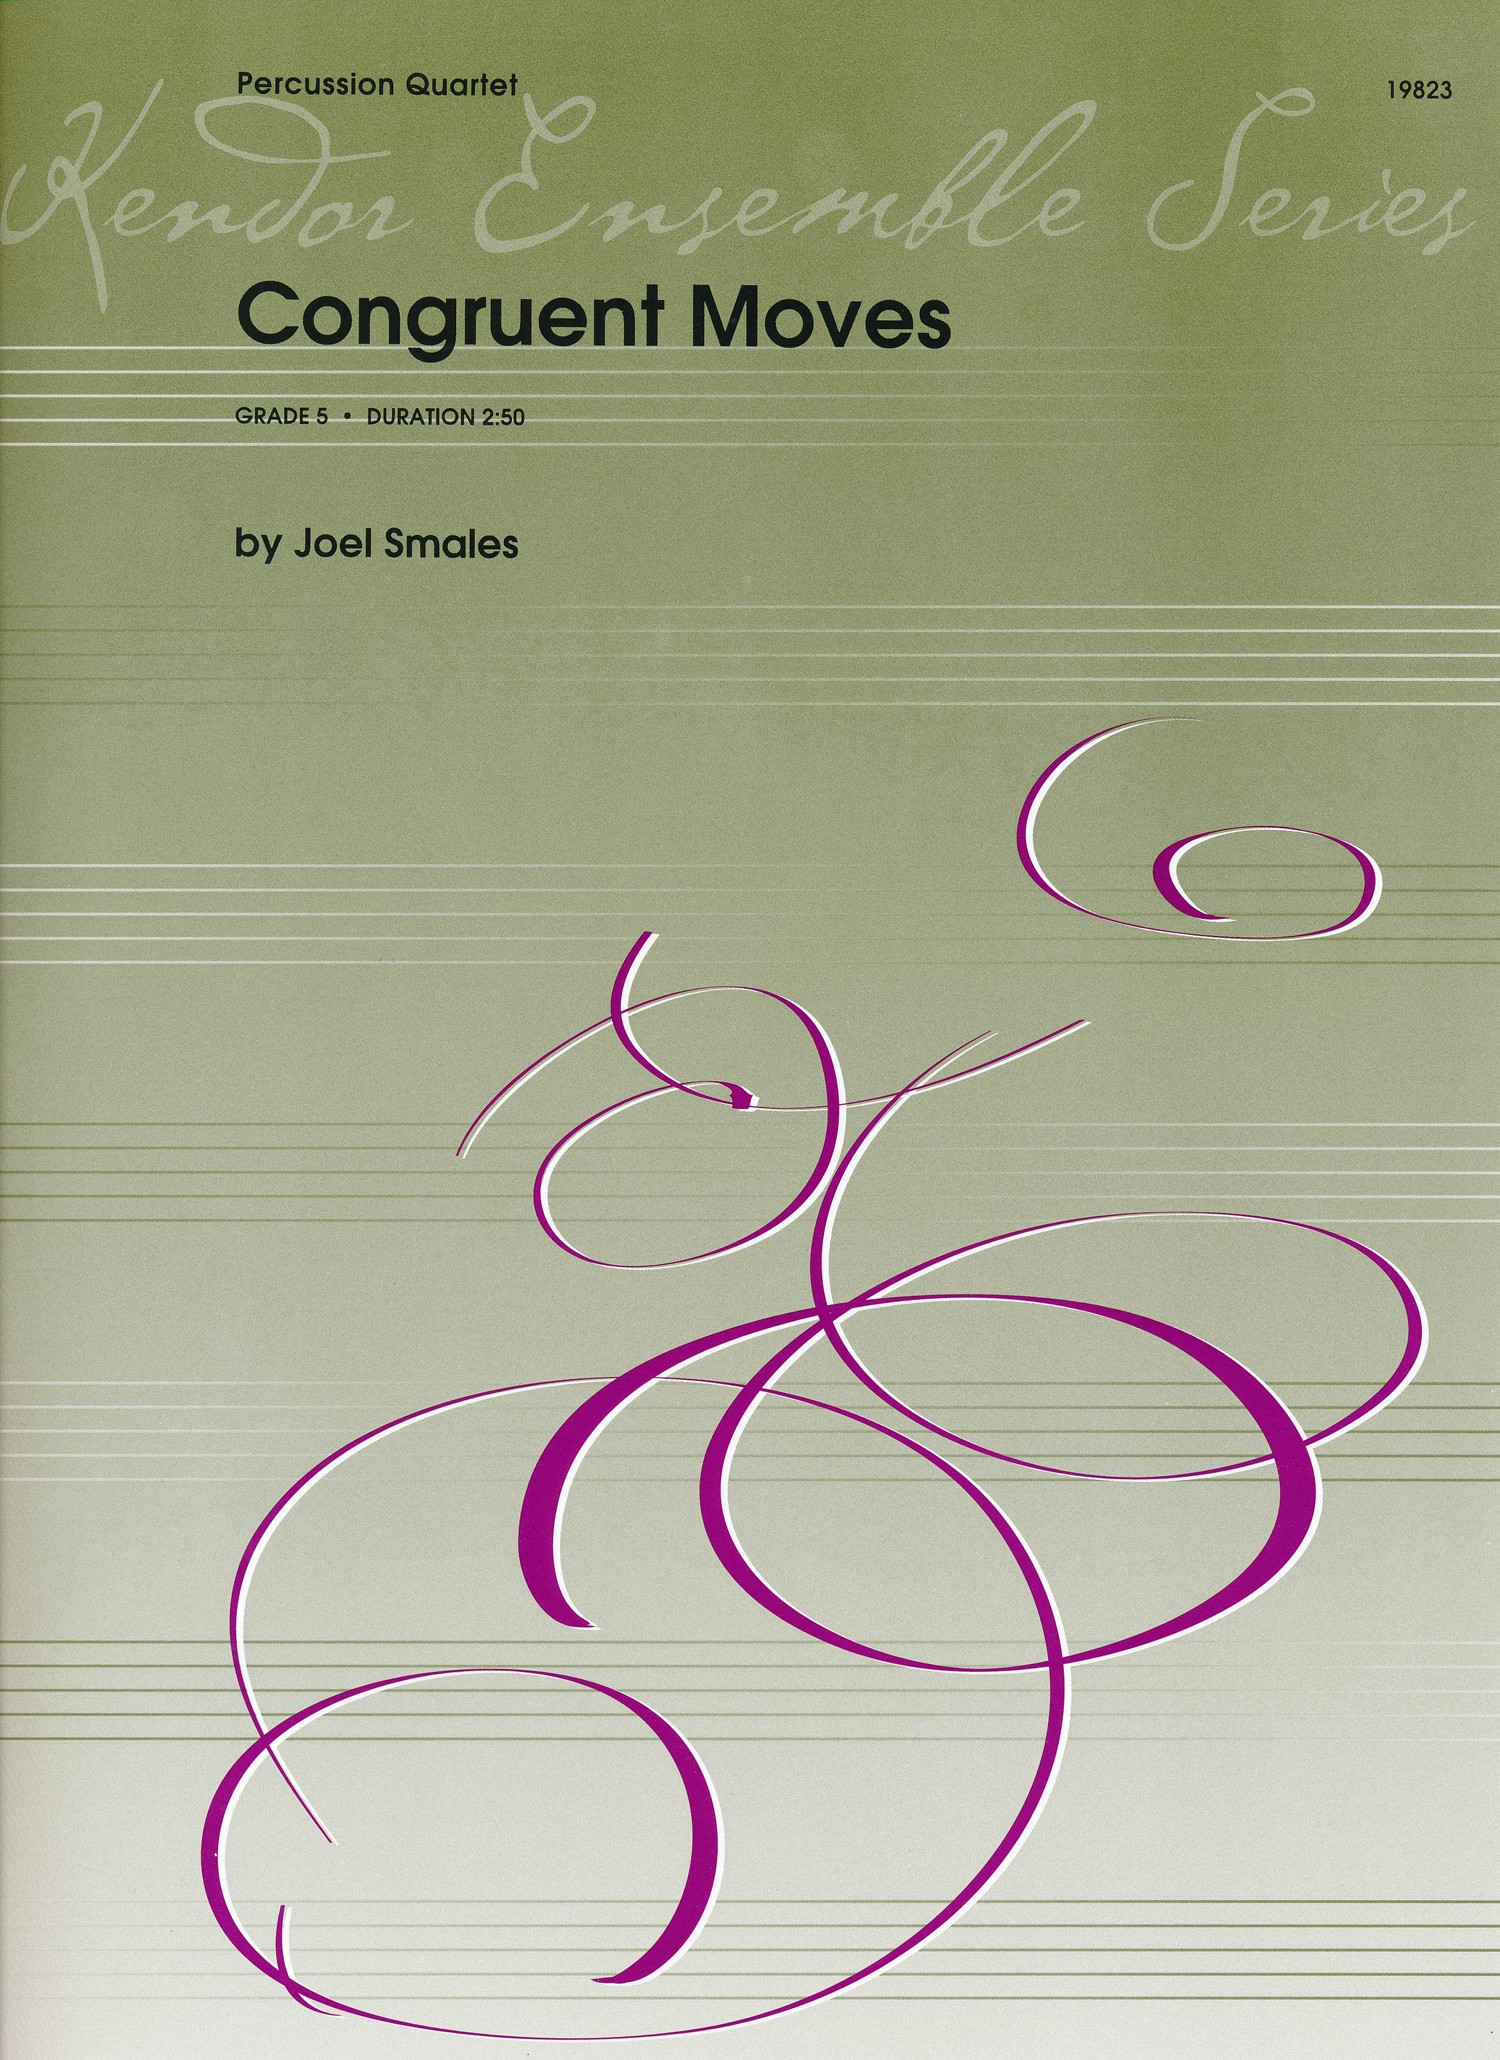 Congruent Moves